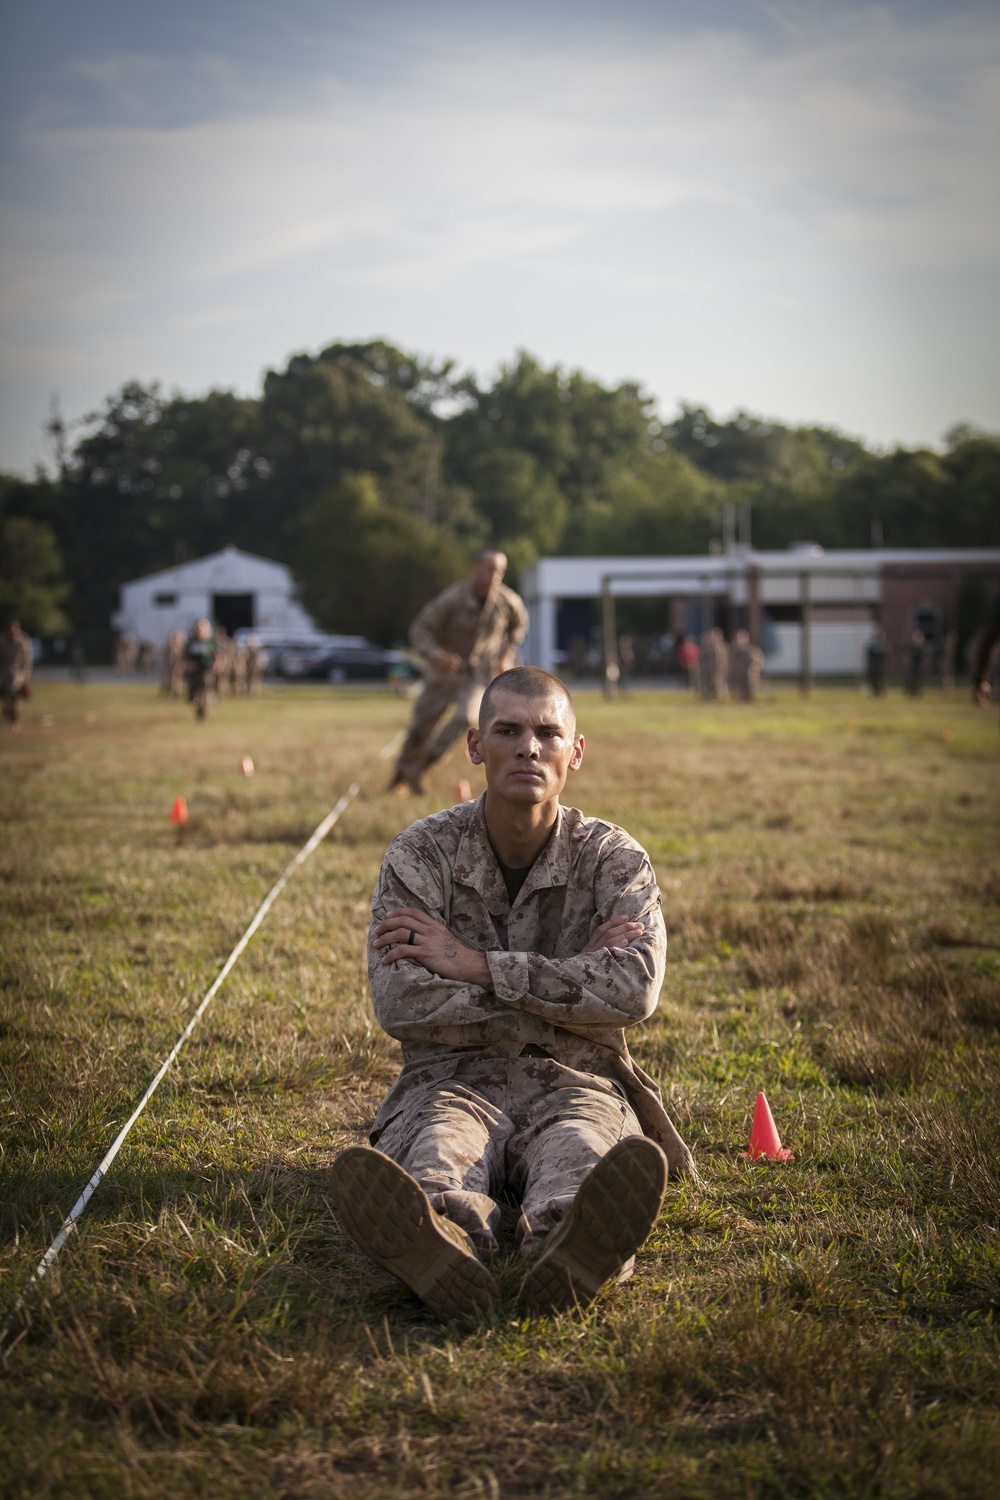 Marine Corps officer candidates get evaluated on the Combat Fitness Test